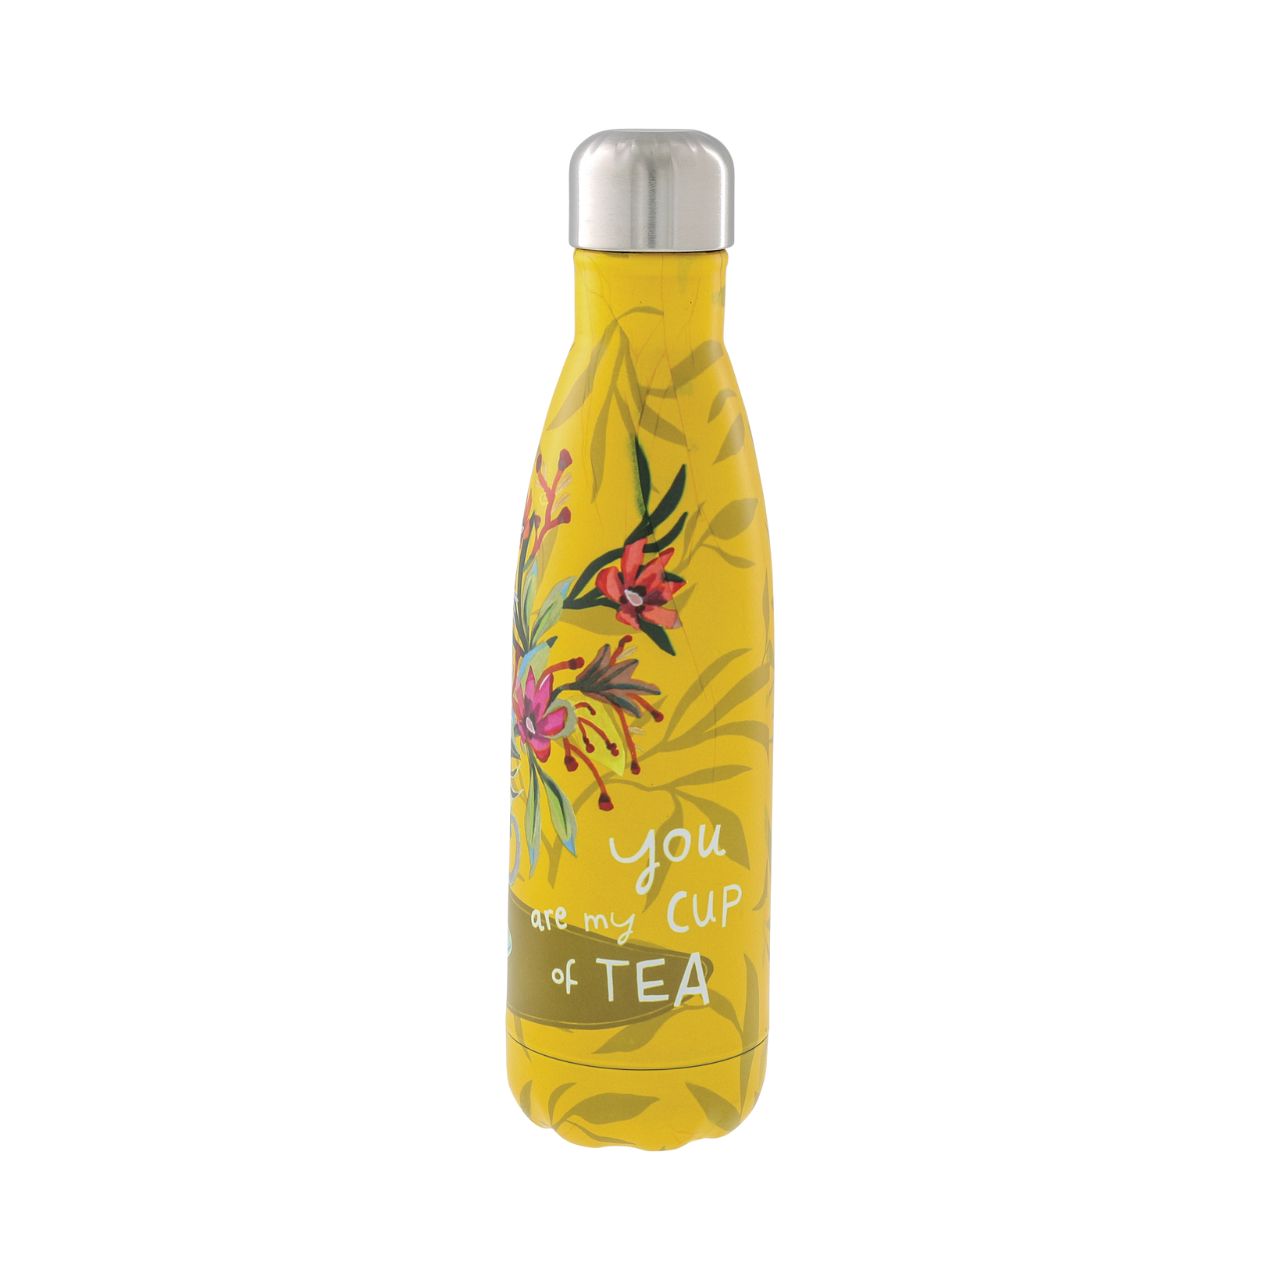 Michelle Allen Cup of Tea Water Bottle  Our Cup of Tea Reusable Water Bottle is made of high-quality, double-walled stainless steel. They are BPA-free and have a special spill-proof vacuum seal keeping your favourite beverage inside hot or cold for at least 12 hours and up to 24 hours. Exclusively designed by Michelle Allen.